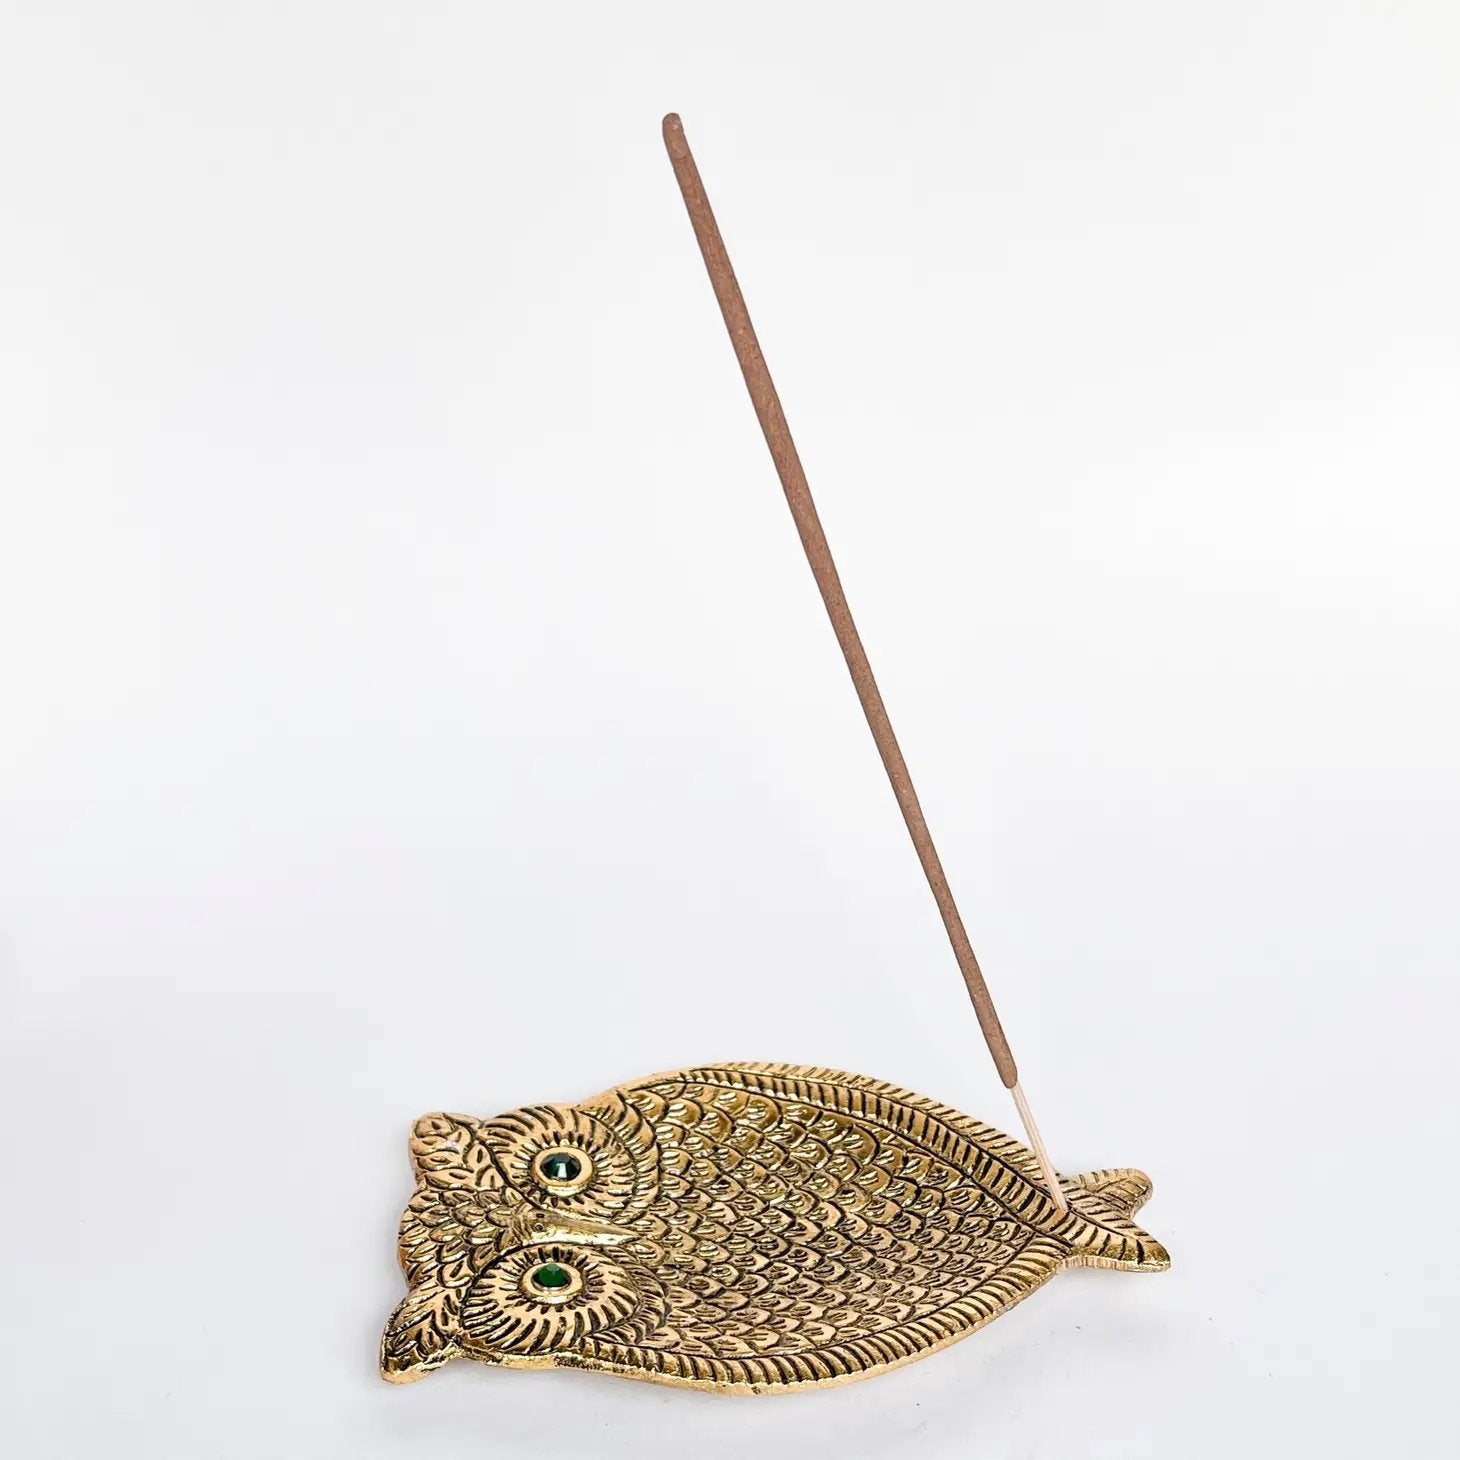 Owl Incense Holder (Gold with Green Eyes) - Incense Holders